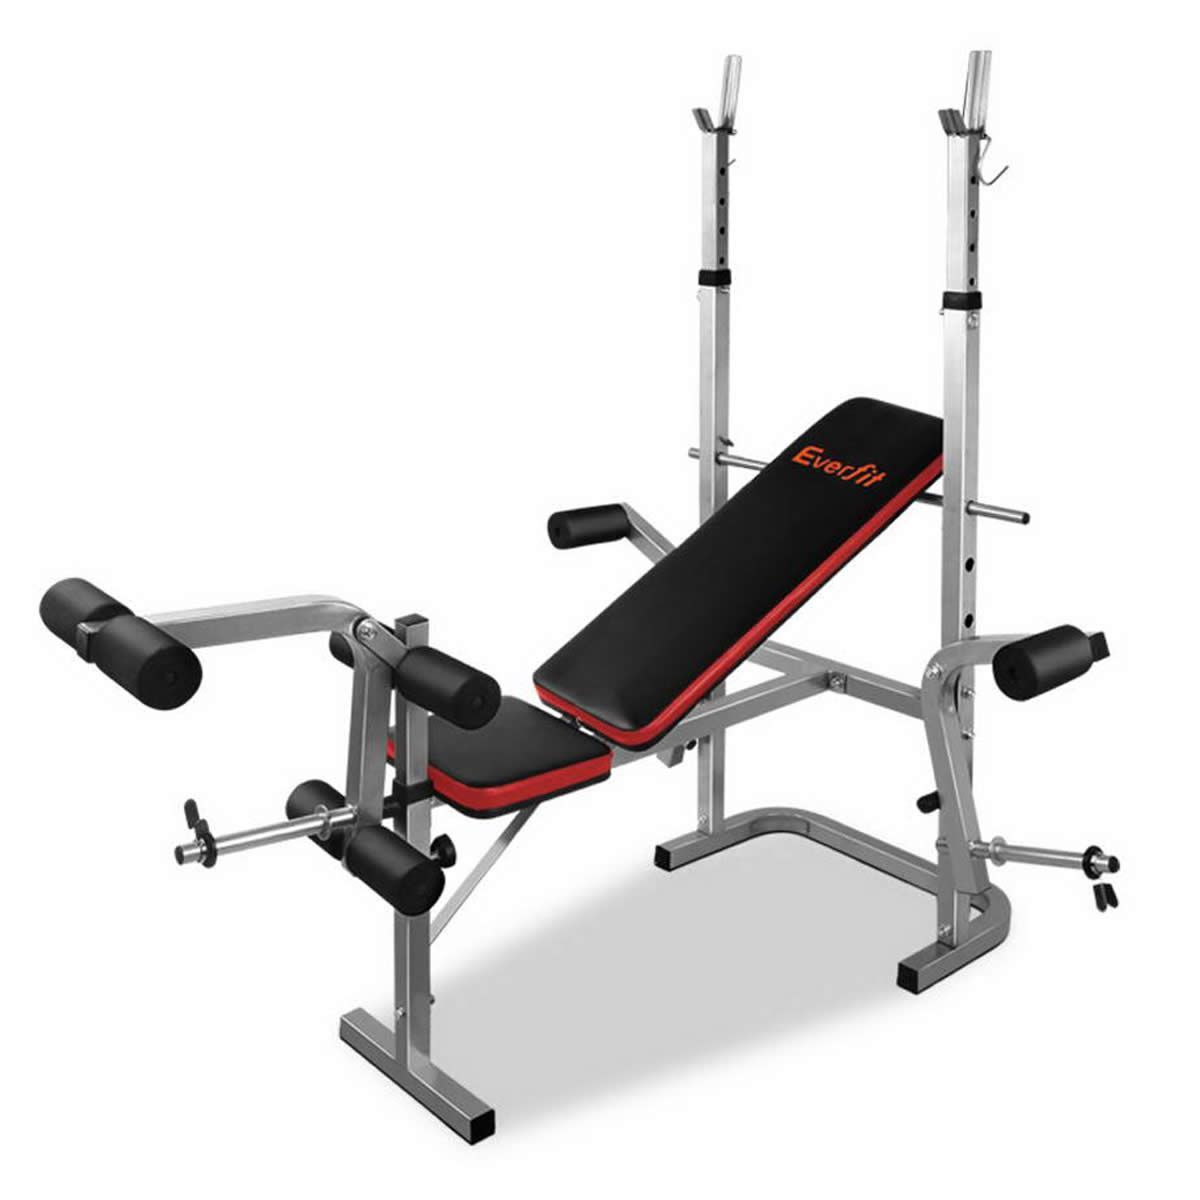 7-in-1 Weight Bench with 4 Adjustable Incline Levels - Grey | Crazy Sales